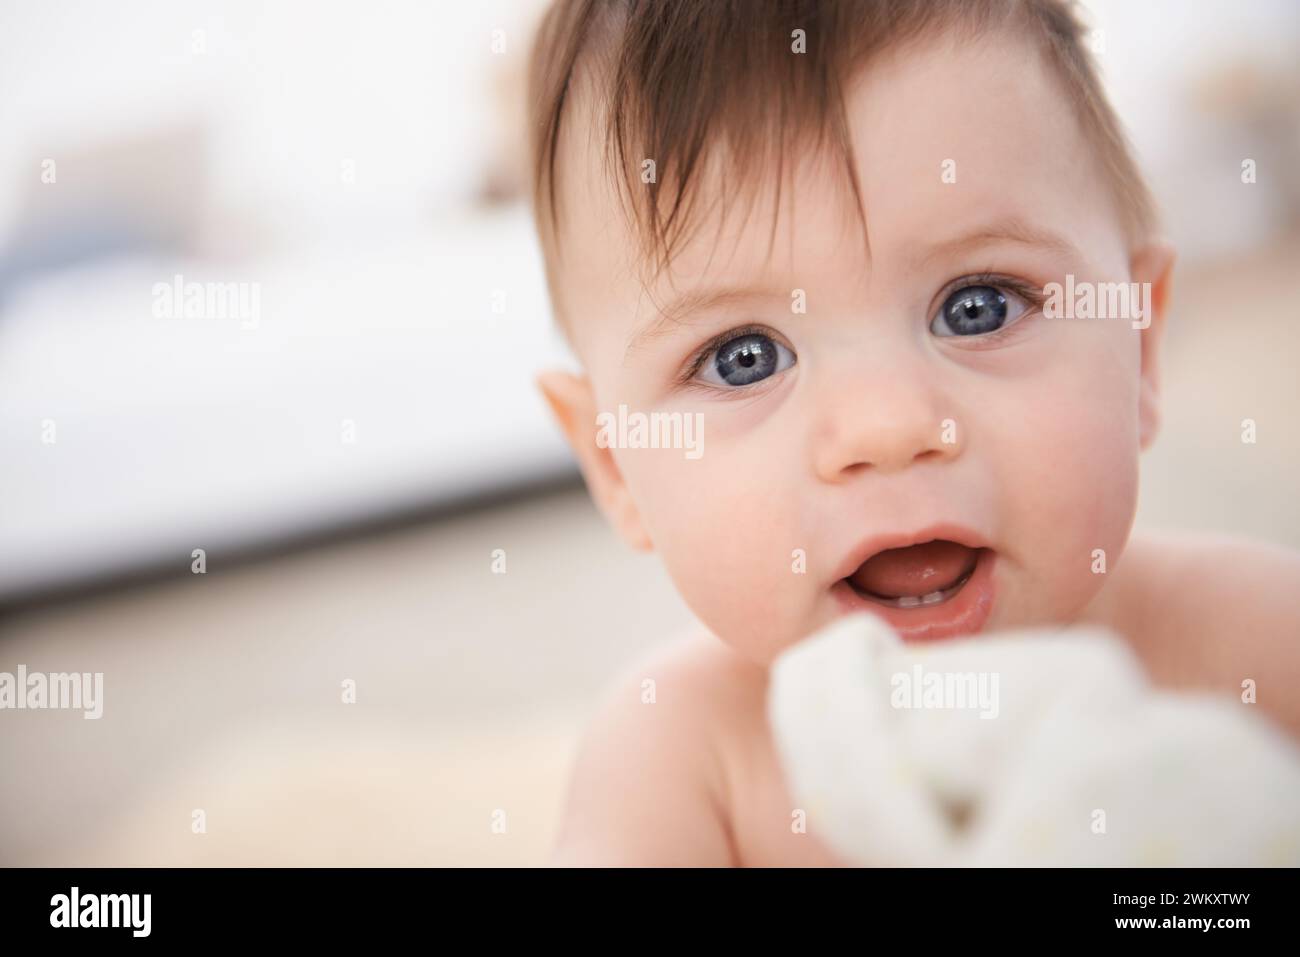 Happy, baby and portrait for growth and development with face of infant with innocence. Toddler, adorable and cute, smiling and teething for childhood Stock Photo